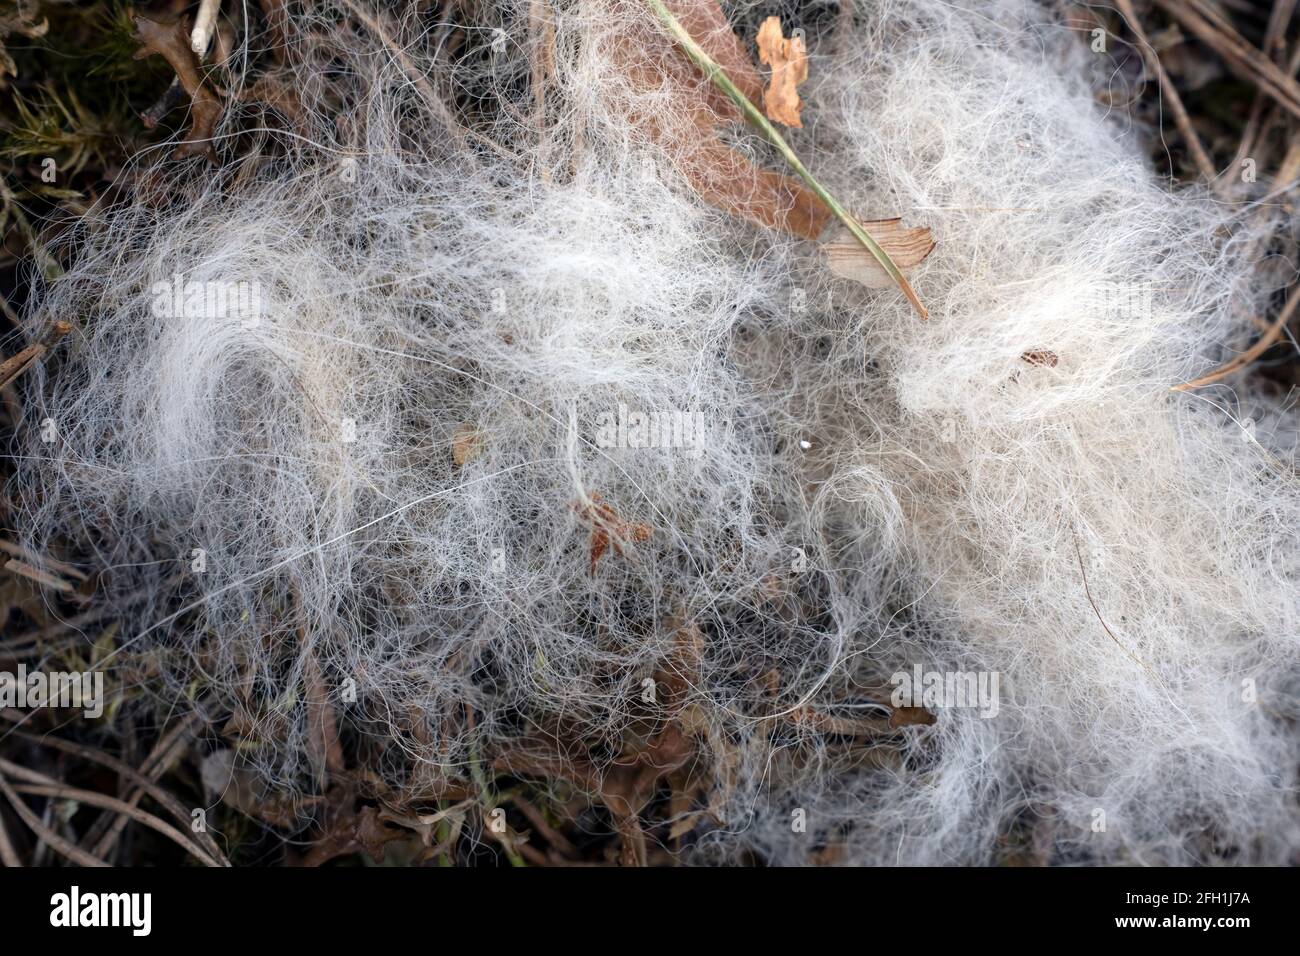 Animal hair on forest floor in closeup Stock Photo